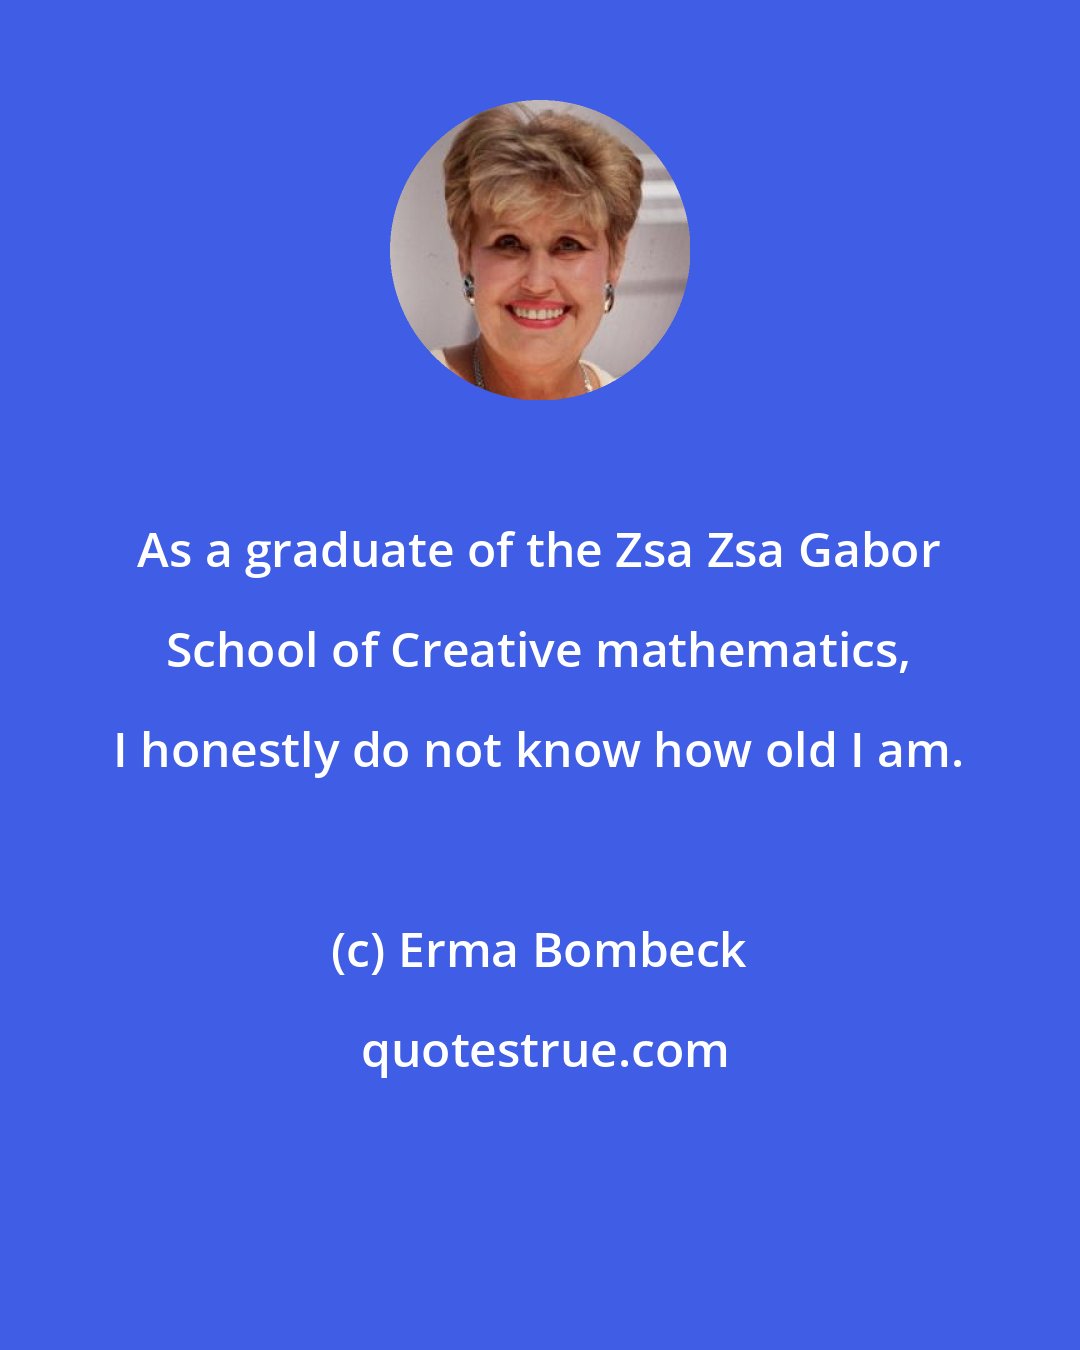 Erma Bombeck: As a graduate of the Zsa Zsa Gabor School of Creative mathematics, I honestly do not know how old I am.